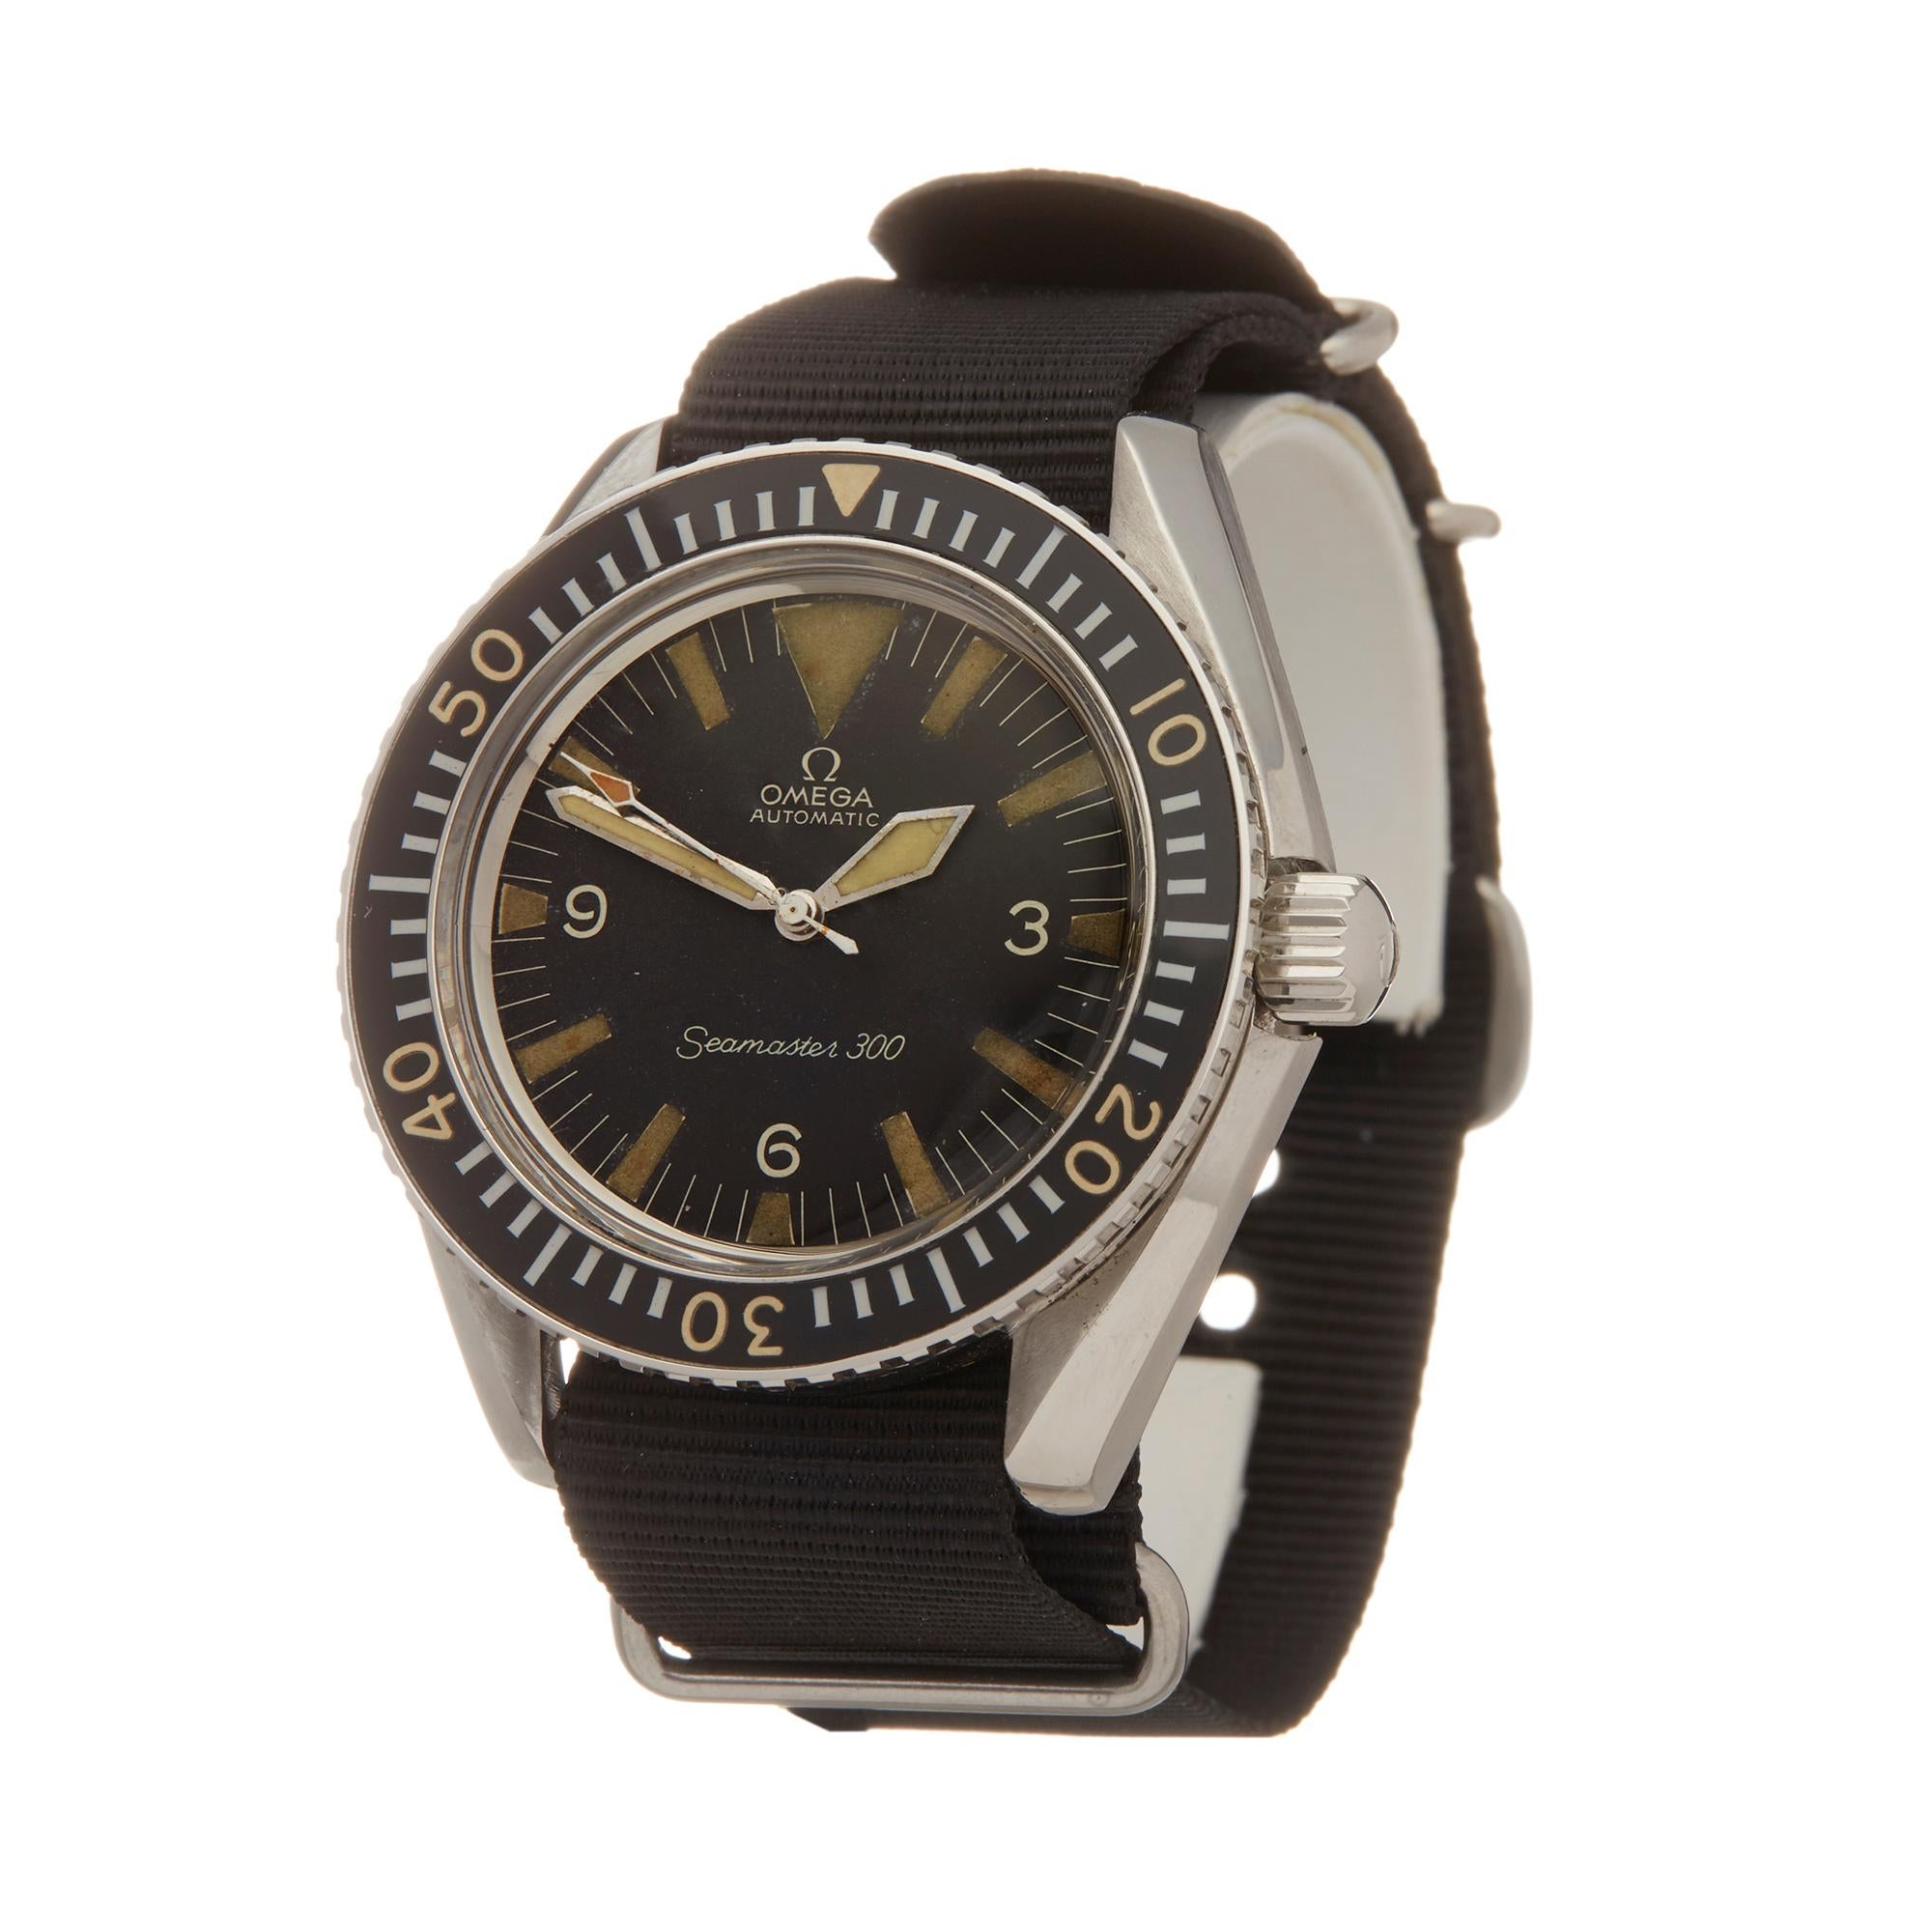 Ref: W5903
Manufacturer: Omega
Model: Seamaster
Model Ref: ST 165.024
Age: March 29th 1967
Gender: Mens
Complete With: Presentation Box & Archive Extract
Dial: Black Baton
Glass: Plexiglass
Movement: Automatic
Water Resistance: To Manufacturers